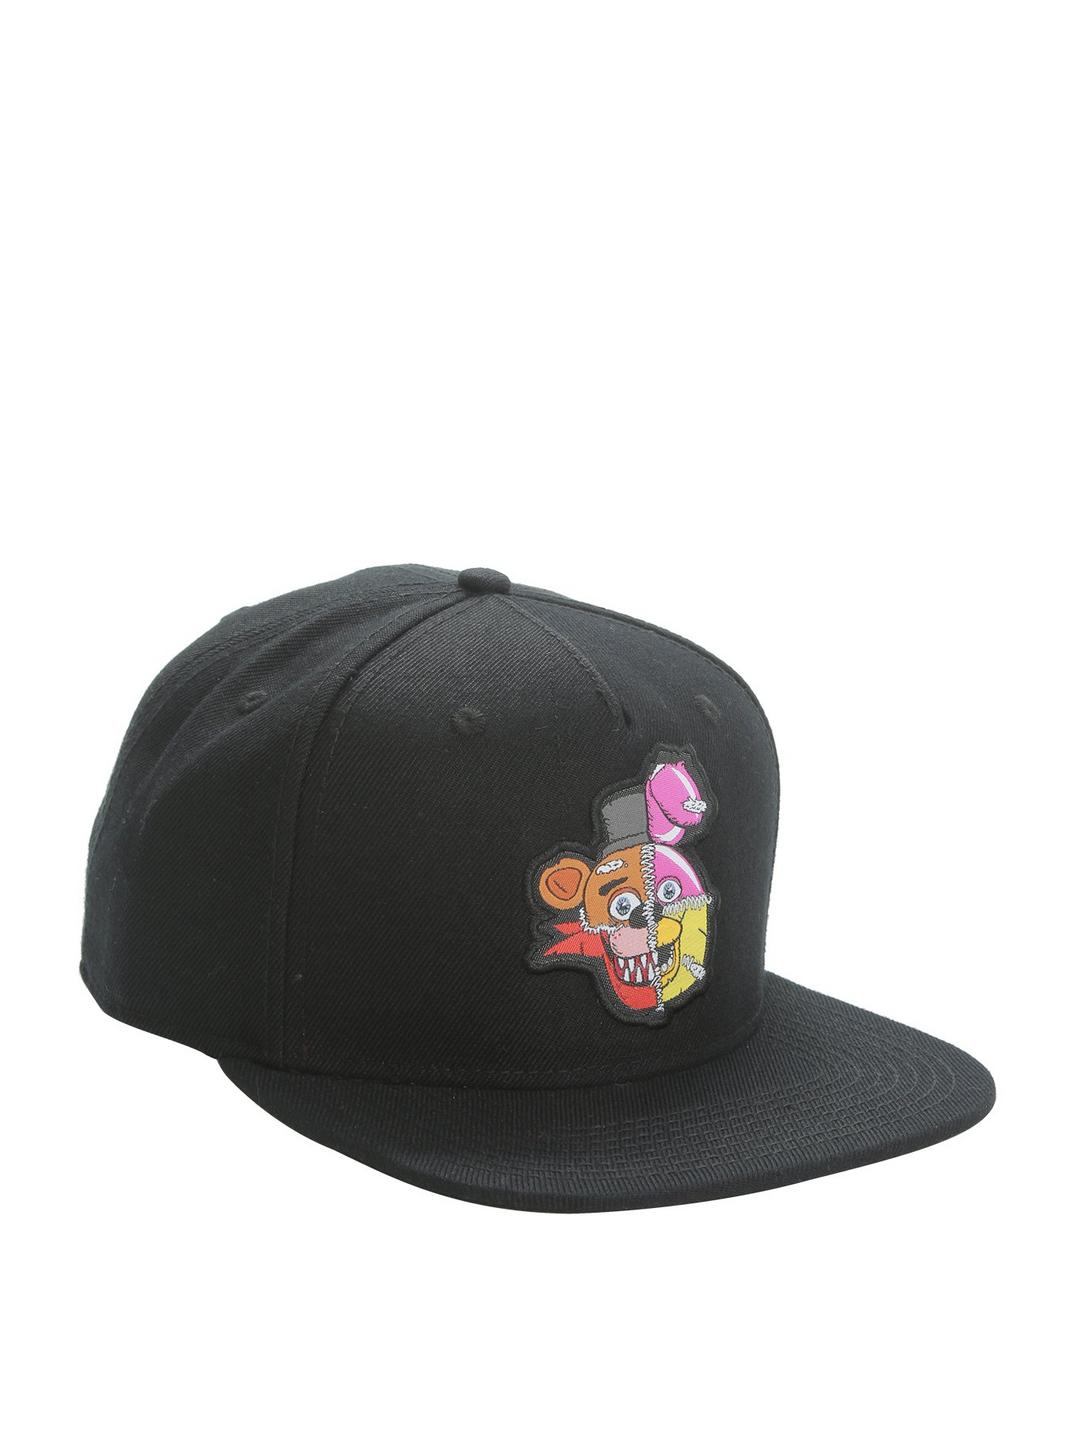 Five Nights At Freddy's Stitched Character's Snapback Hat, , hi-res